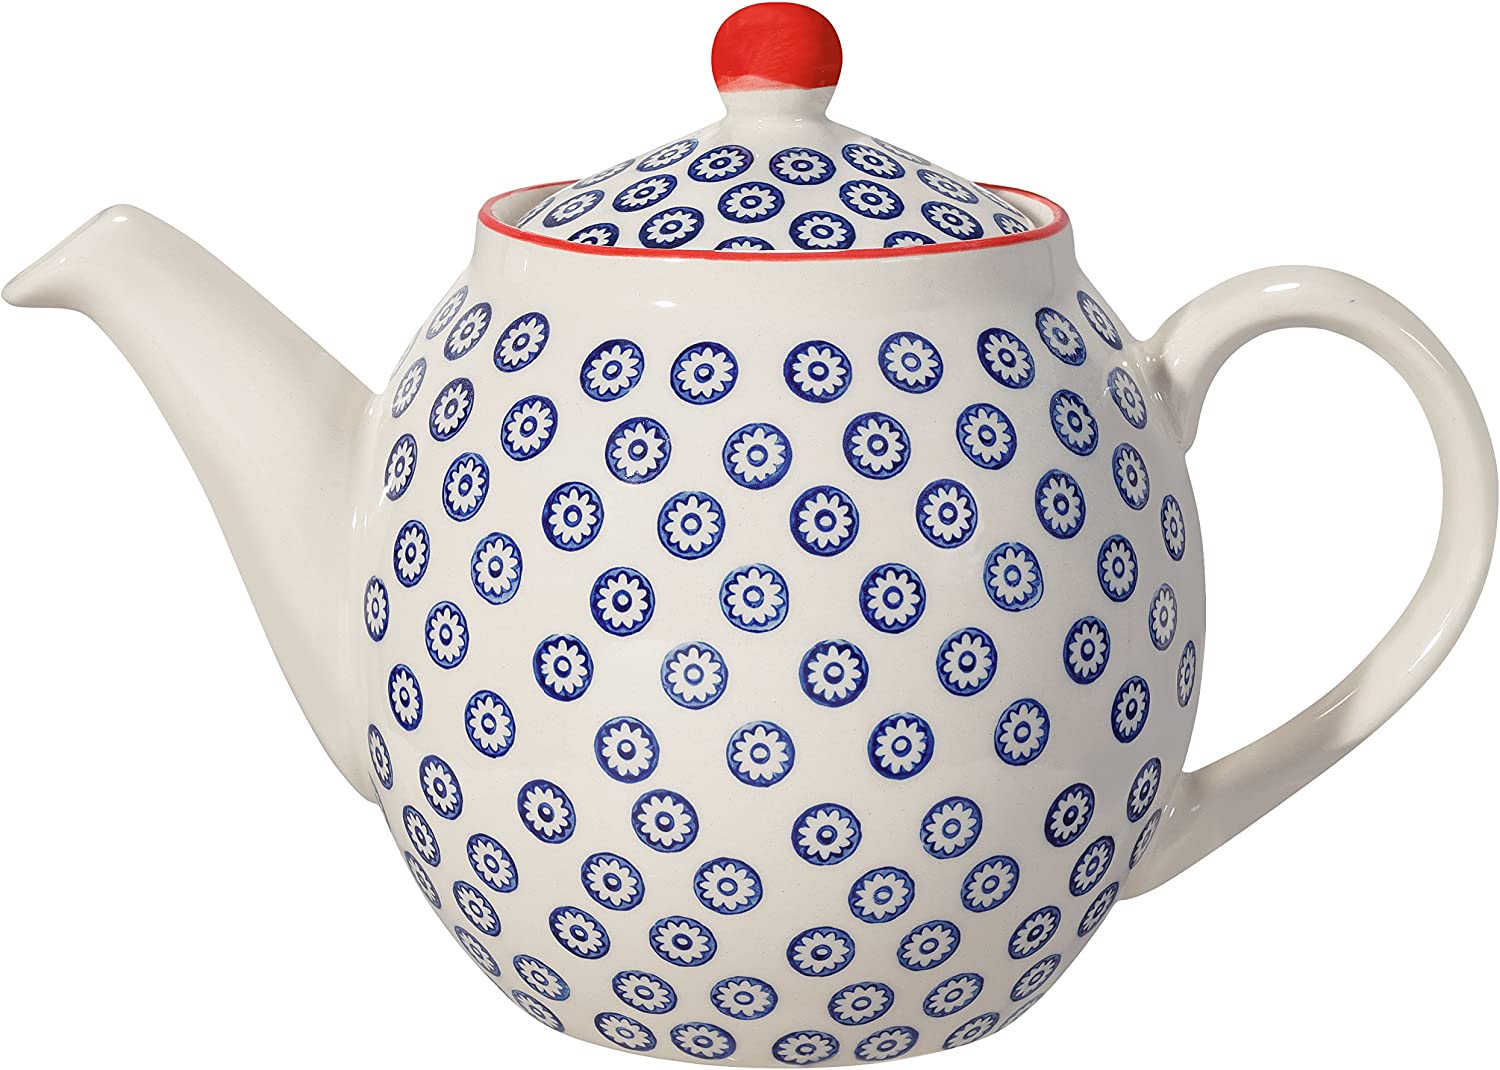 Bloomingville Emma Lapis Retro Large Teapot with Integrated Strainer in Front of Spout Vintage Diameter 14 cm Lapis Blue Red Ceramic Holds Approx. 1200 ml